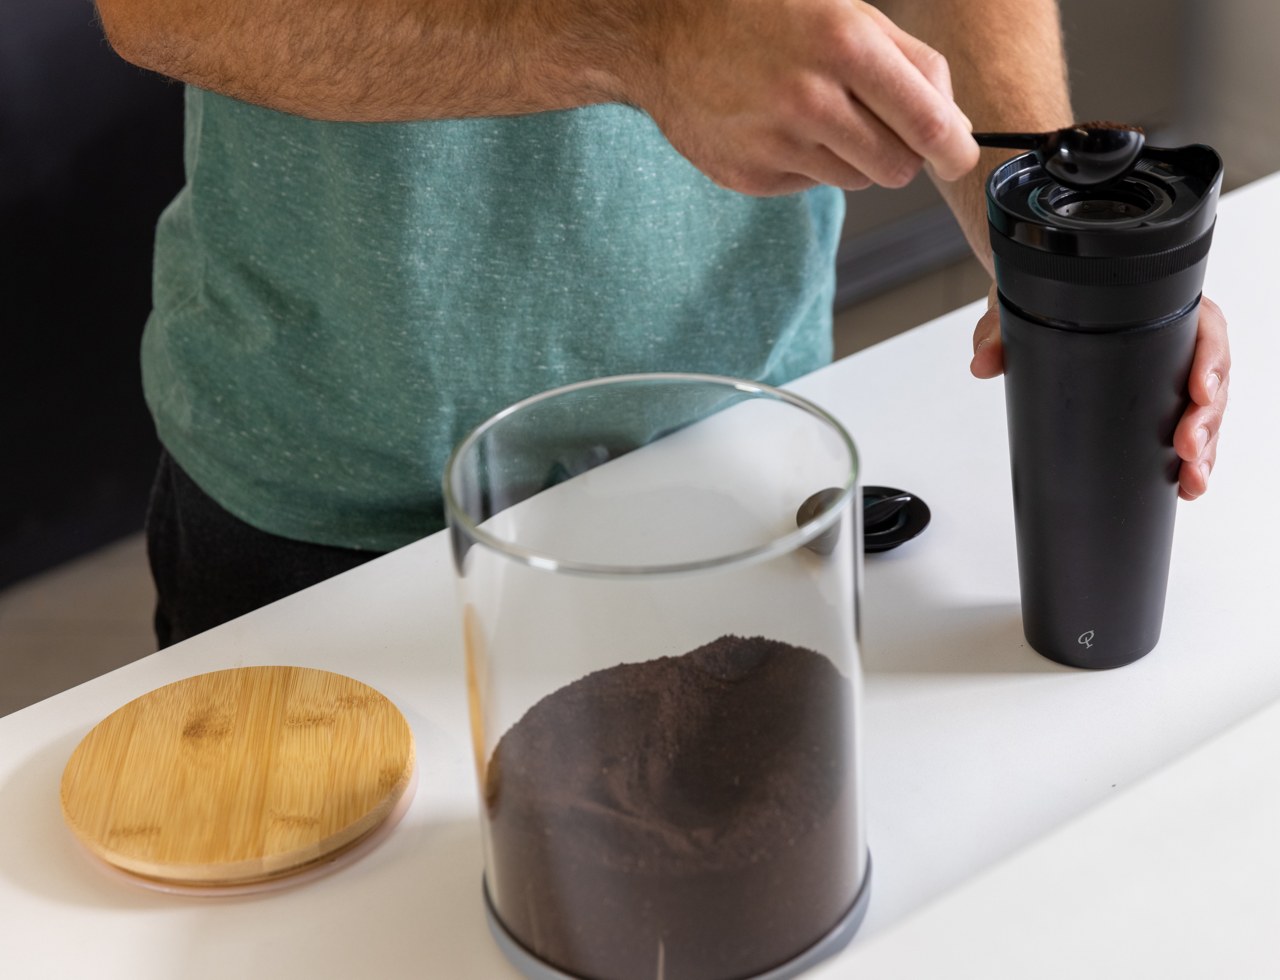 Brewing your coffee in this travel thermos is easier than using a Nespresso